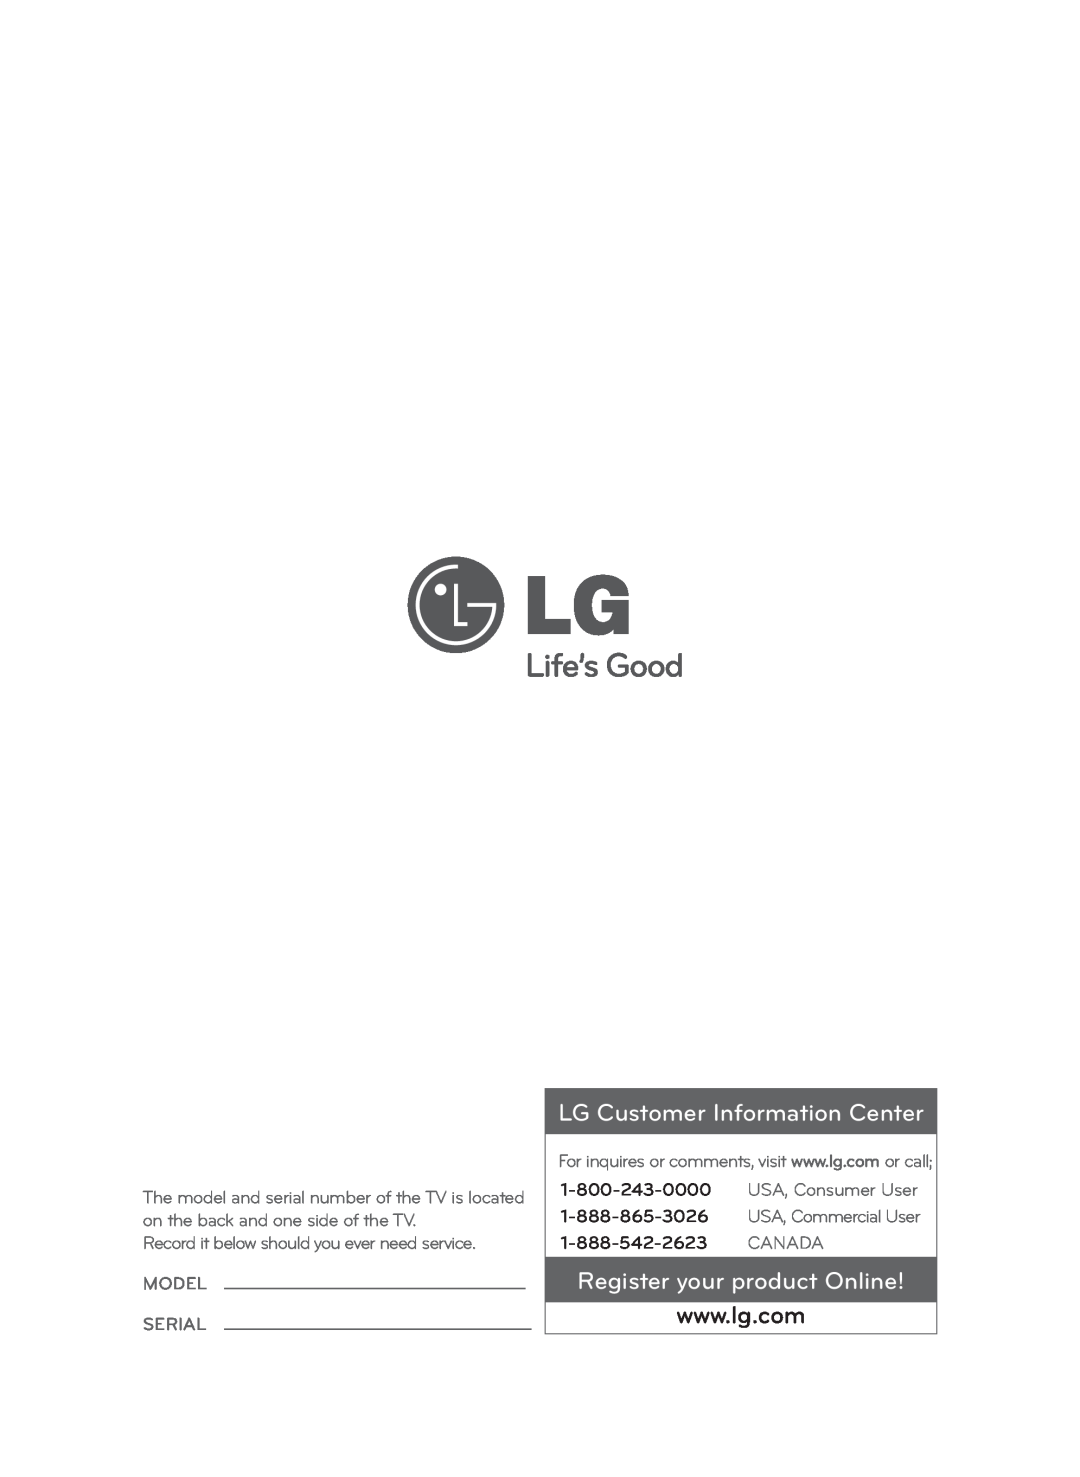 LG Electronics 55LA9650 LG Customer Information Center, Register your product Online, Canada, USA, Consumer User 